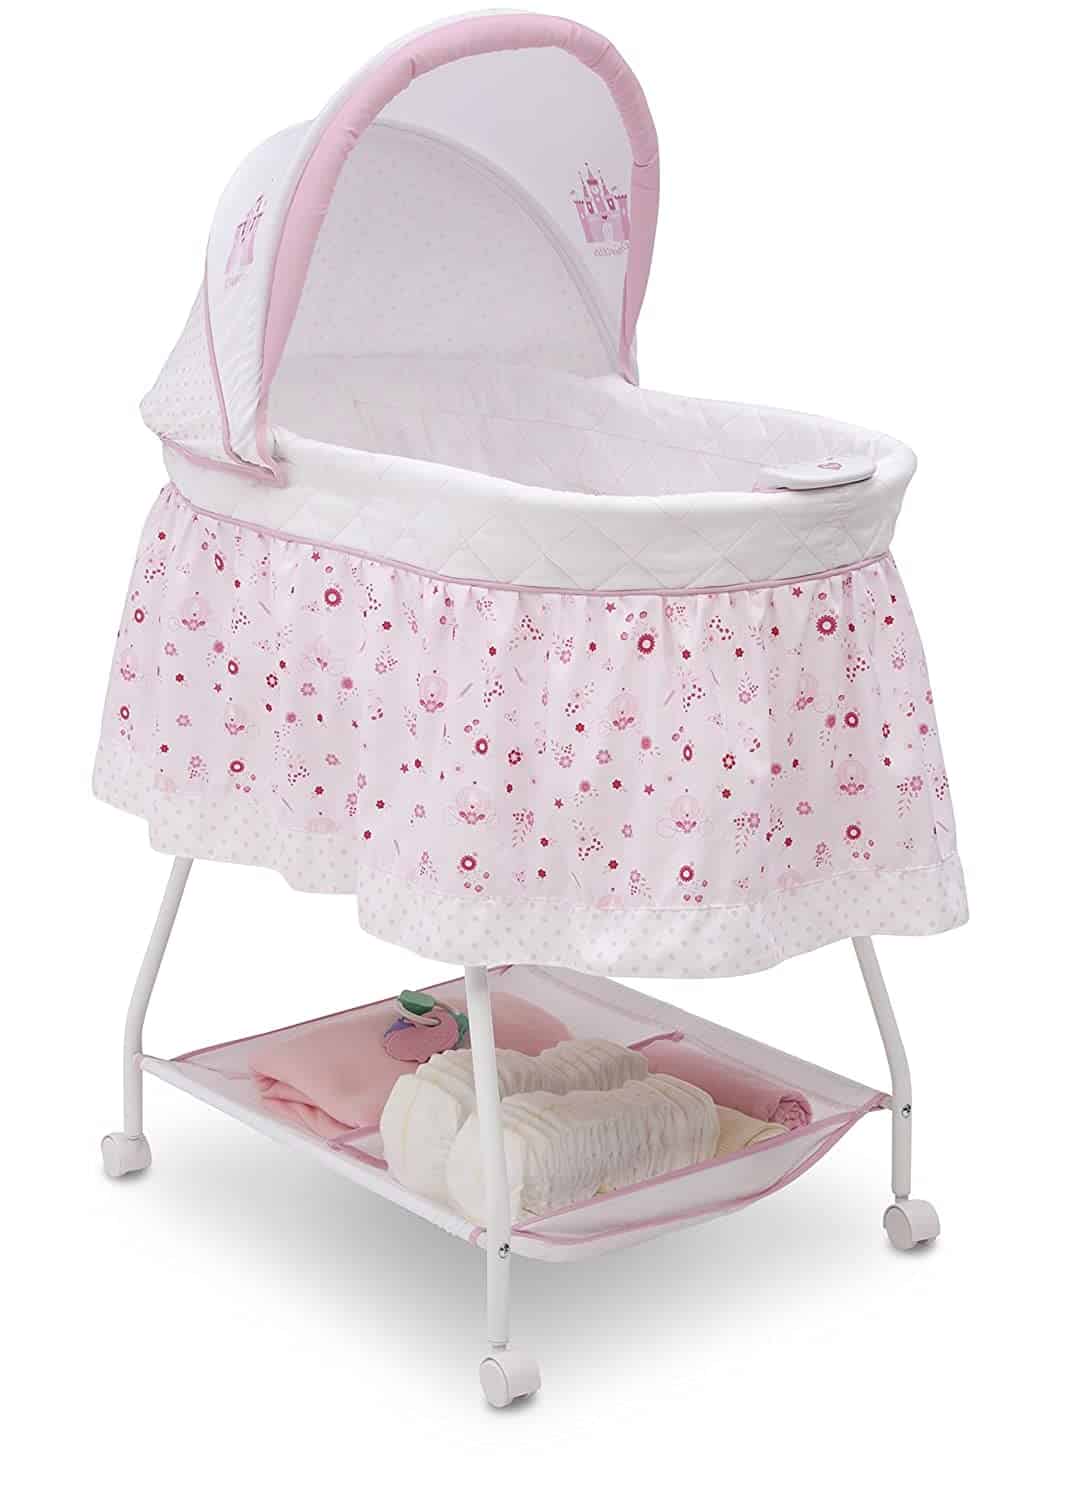 baby bassinet that moves